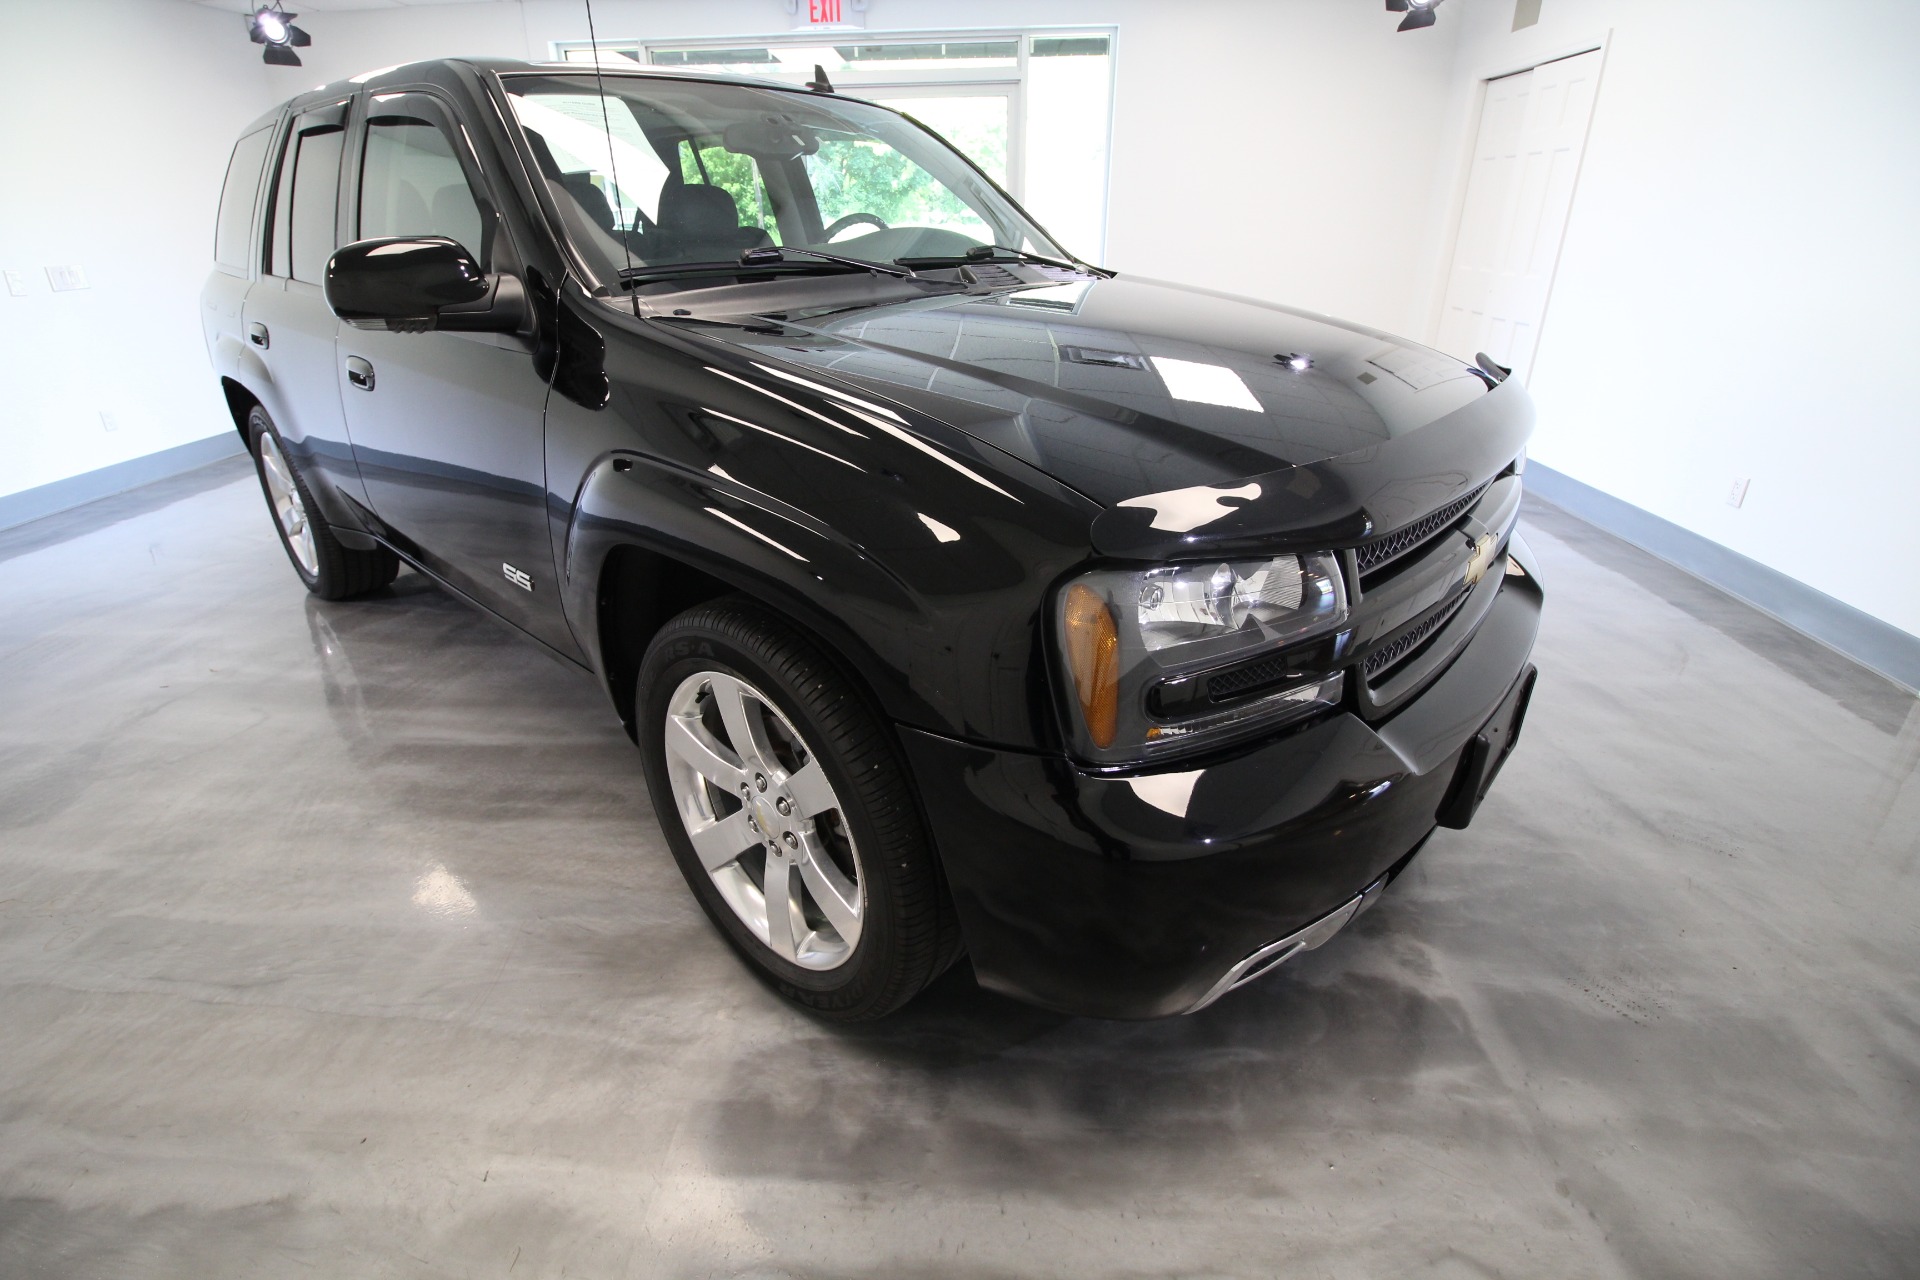 Used 2006 Chevrolet TrailBlazer SS LT COLLECTOR''''S QUALITY SUPERB INSIDE AND OUT LOW MILES 56K | Albany, NY